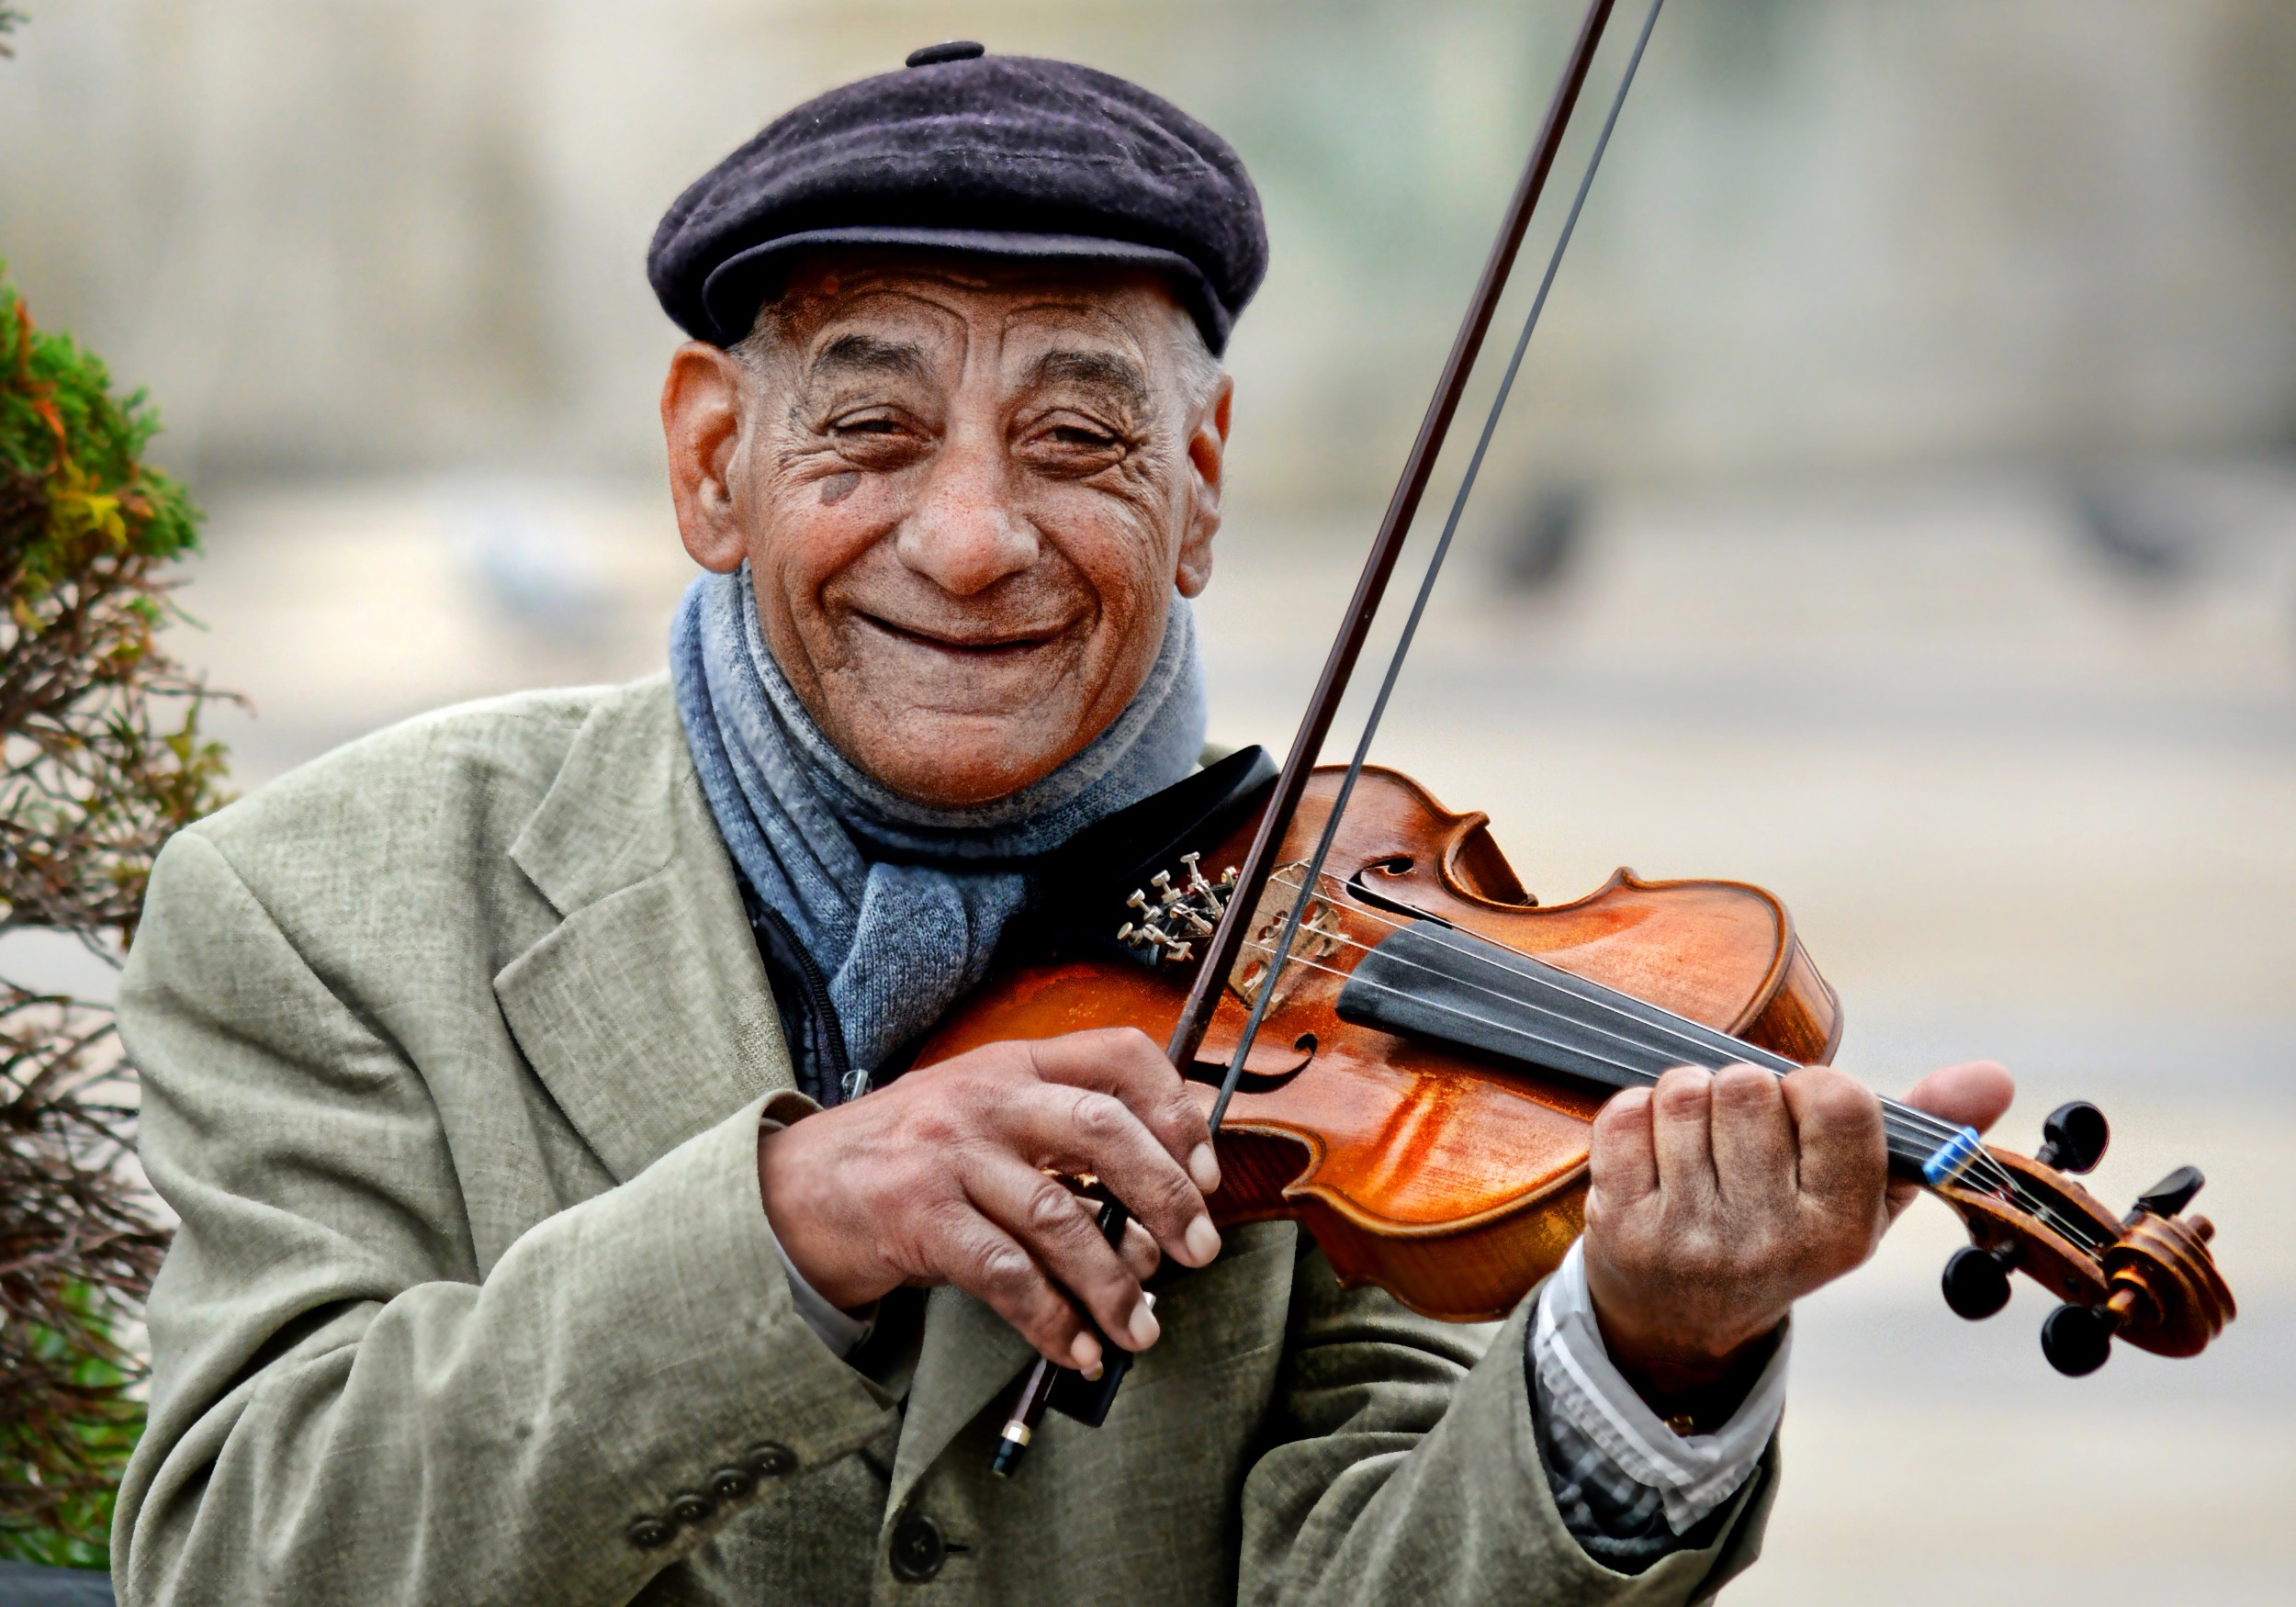 Old man with wrinkled face and smiling while playing the violin